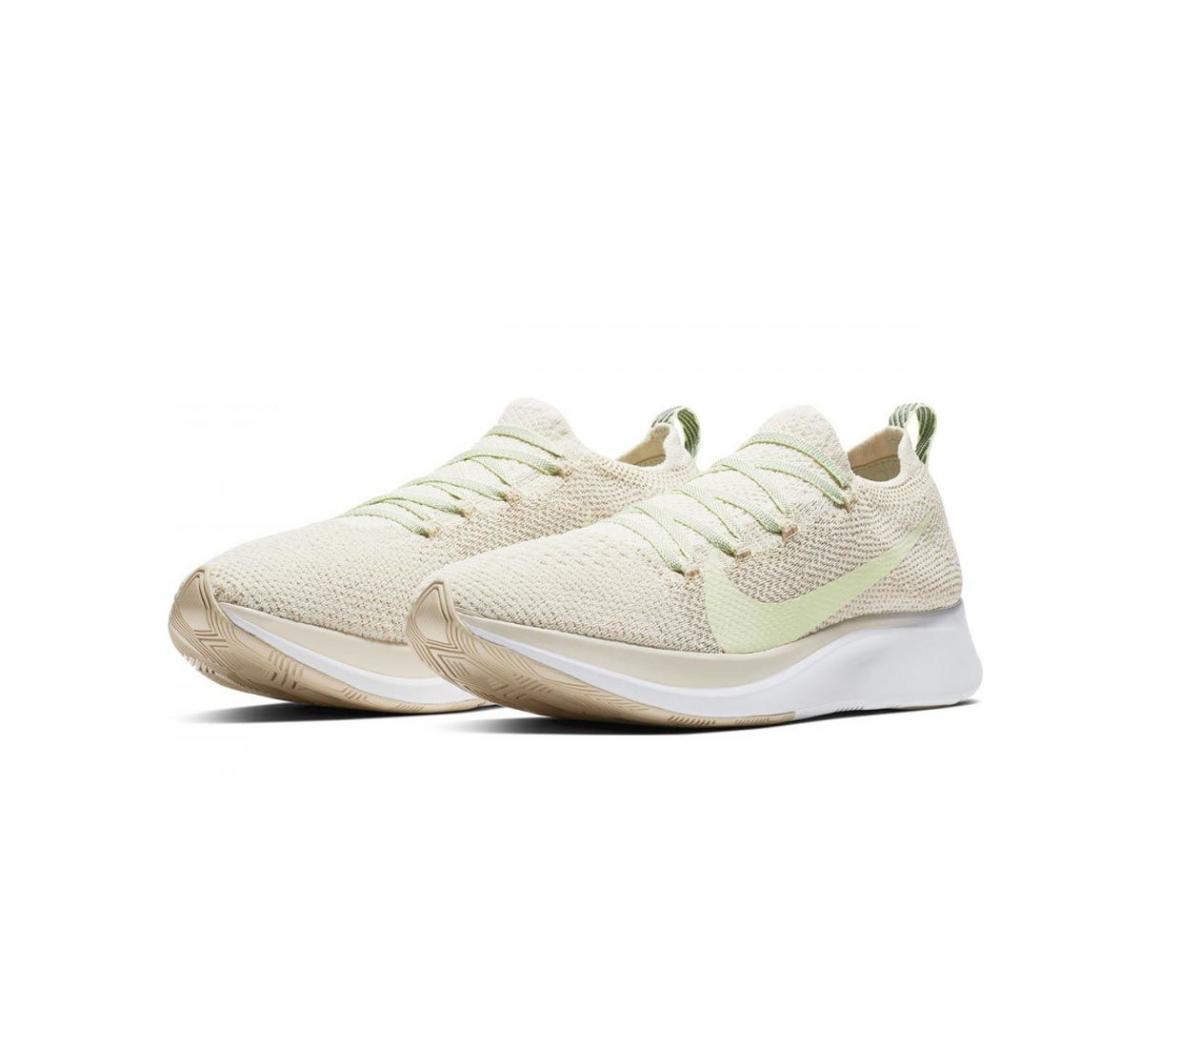 coppia nike fly flyknit donna 200